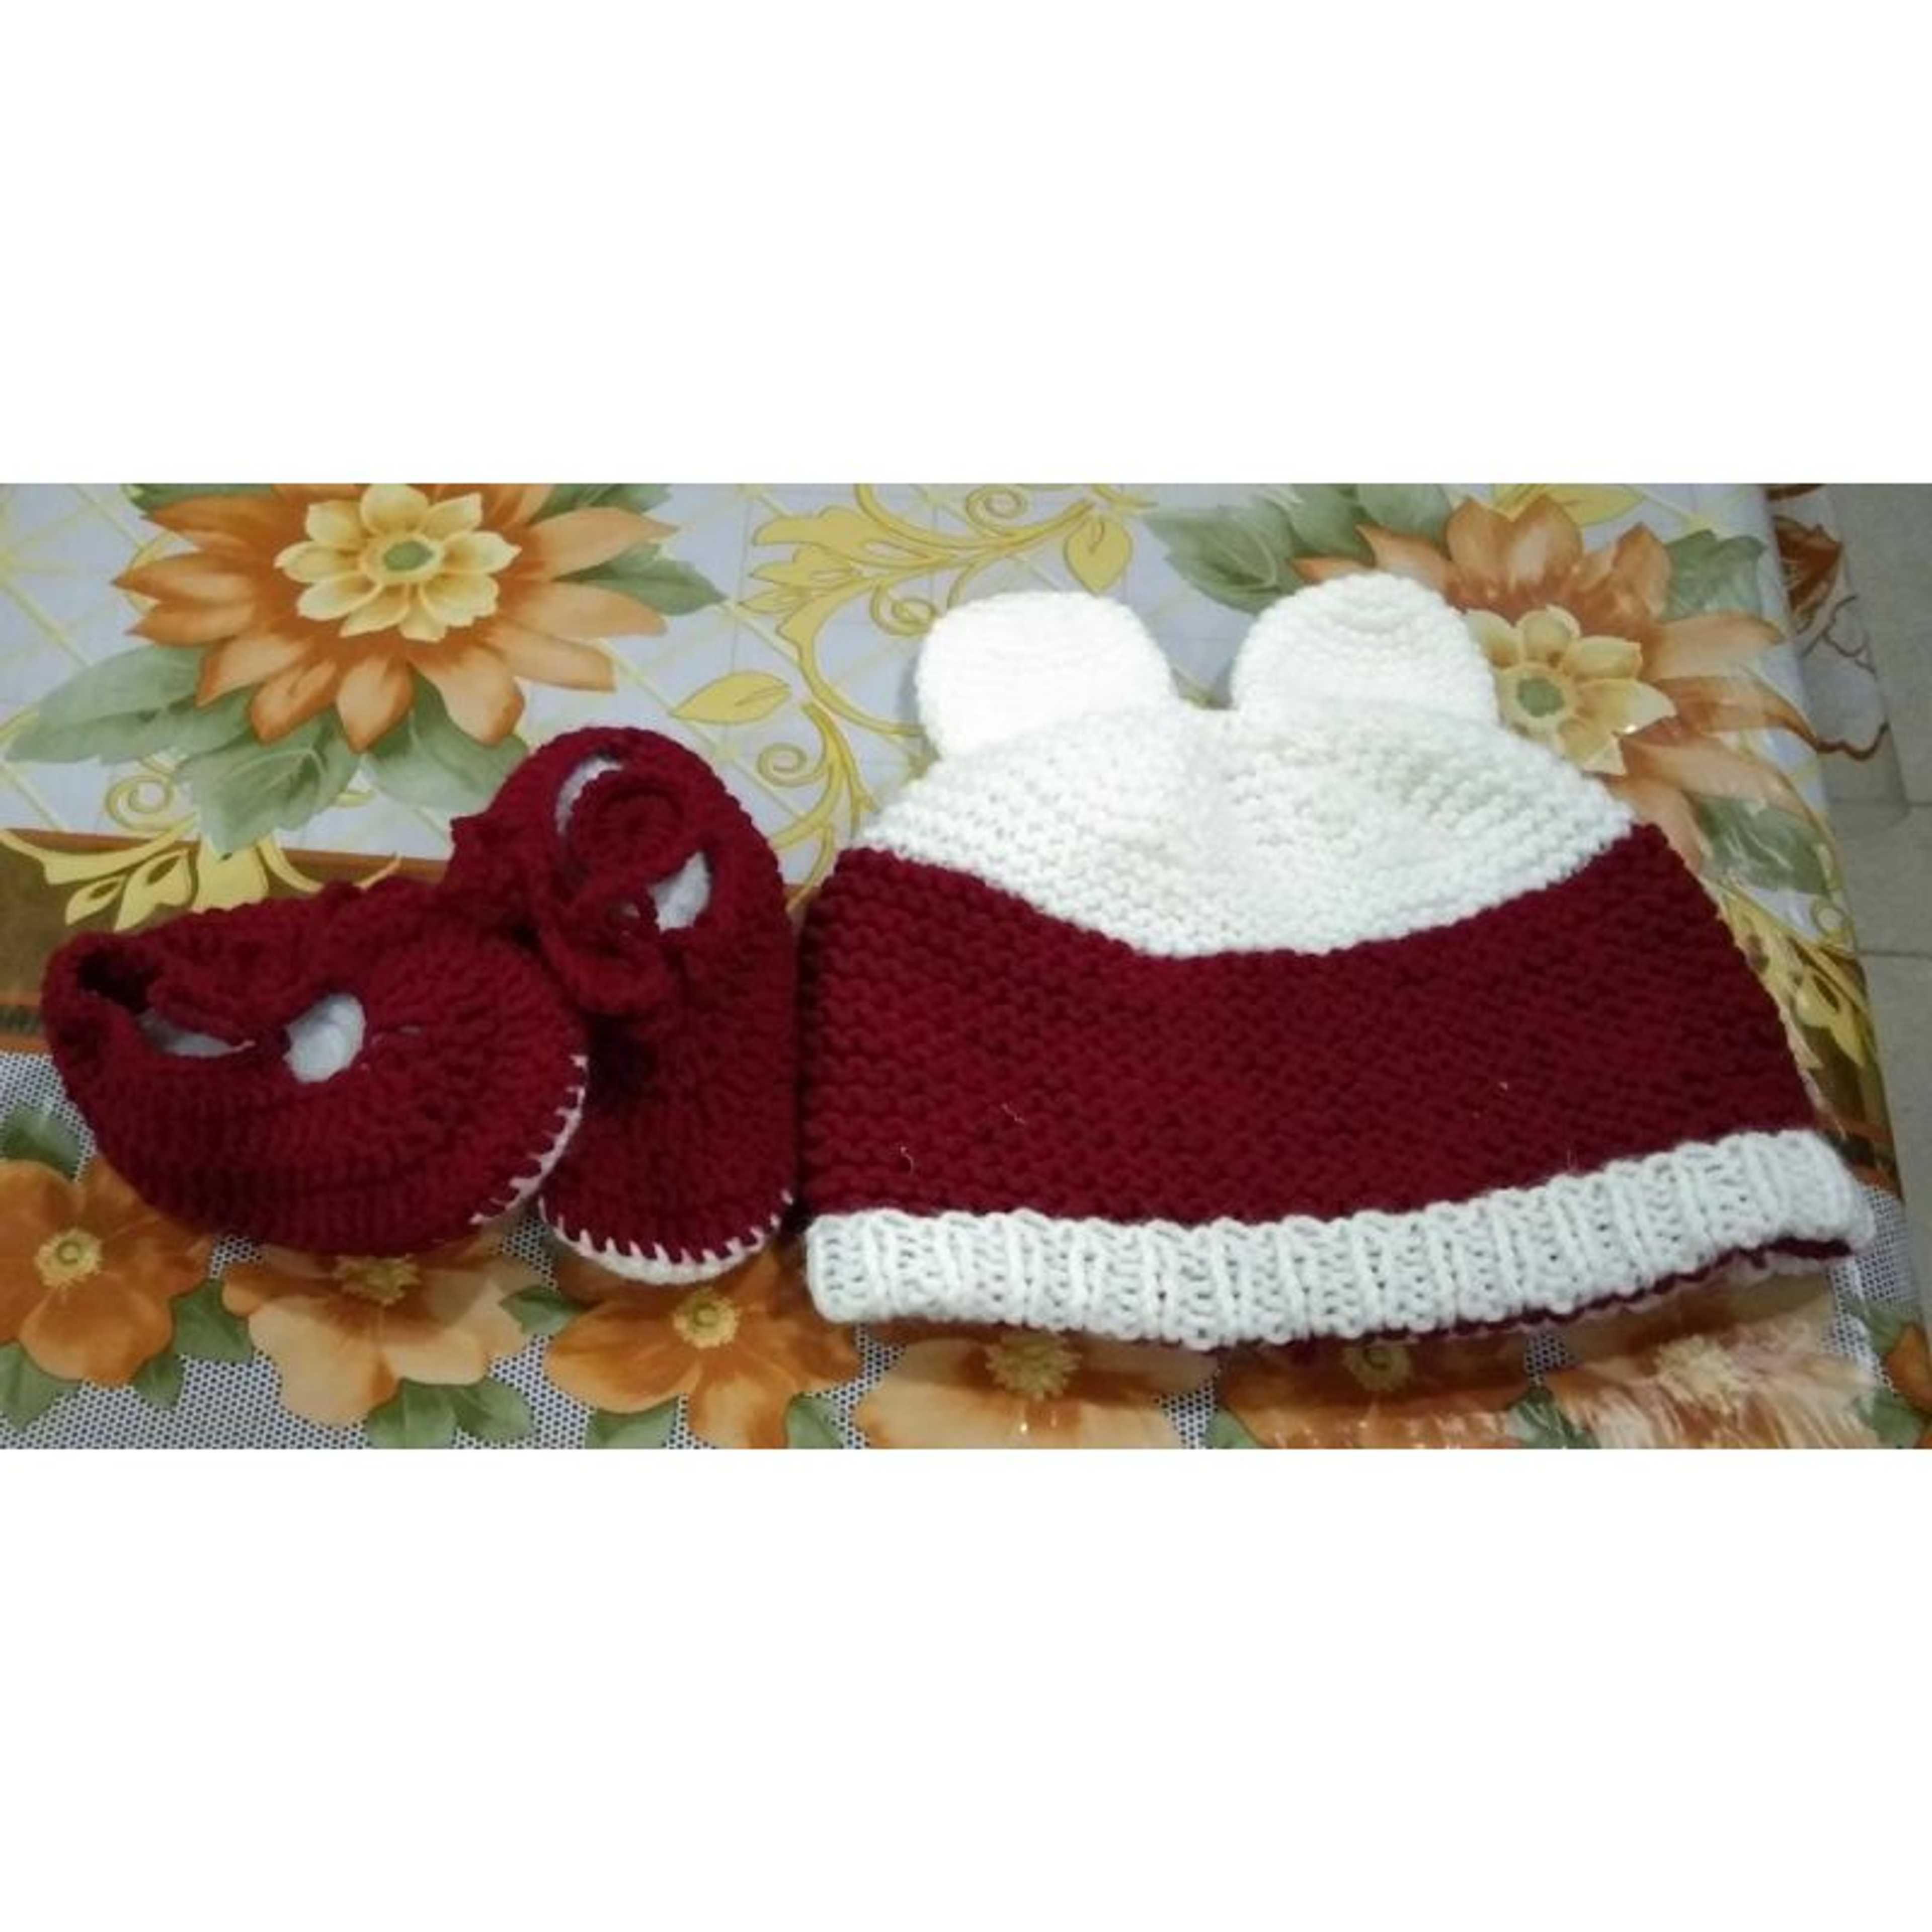 Knitted Cap and Shoes Set for Babies - White and Maroon Color